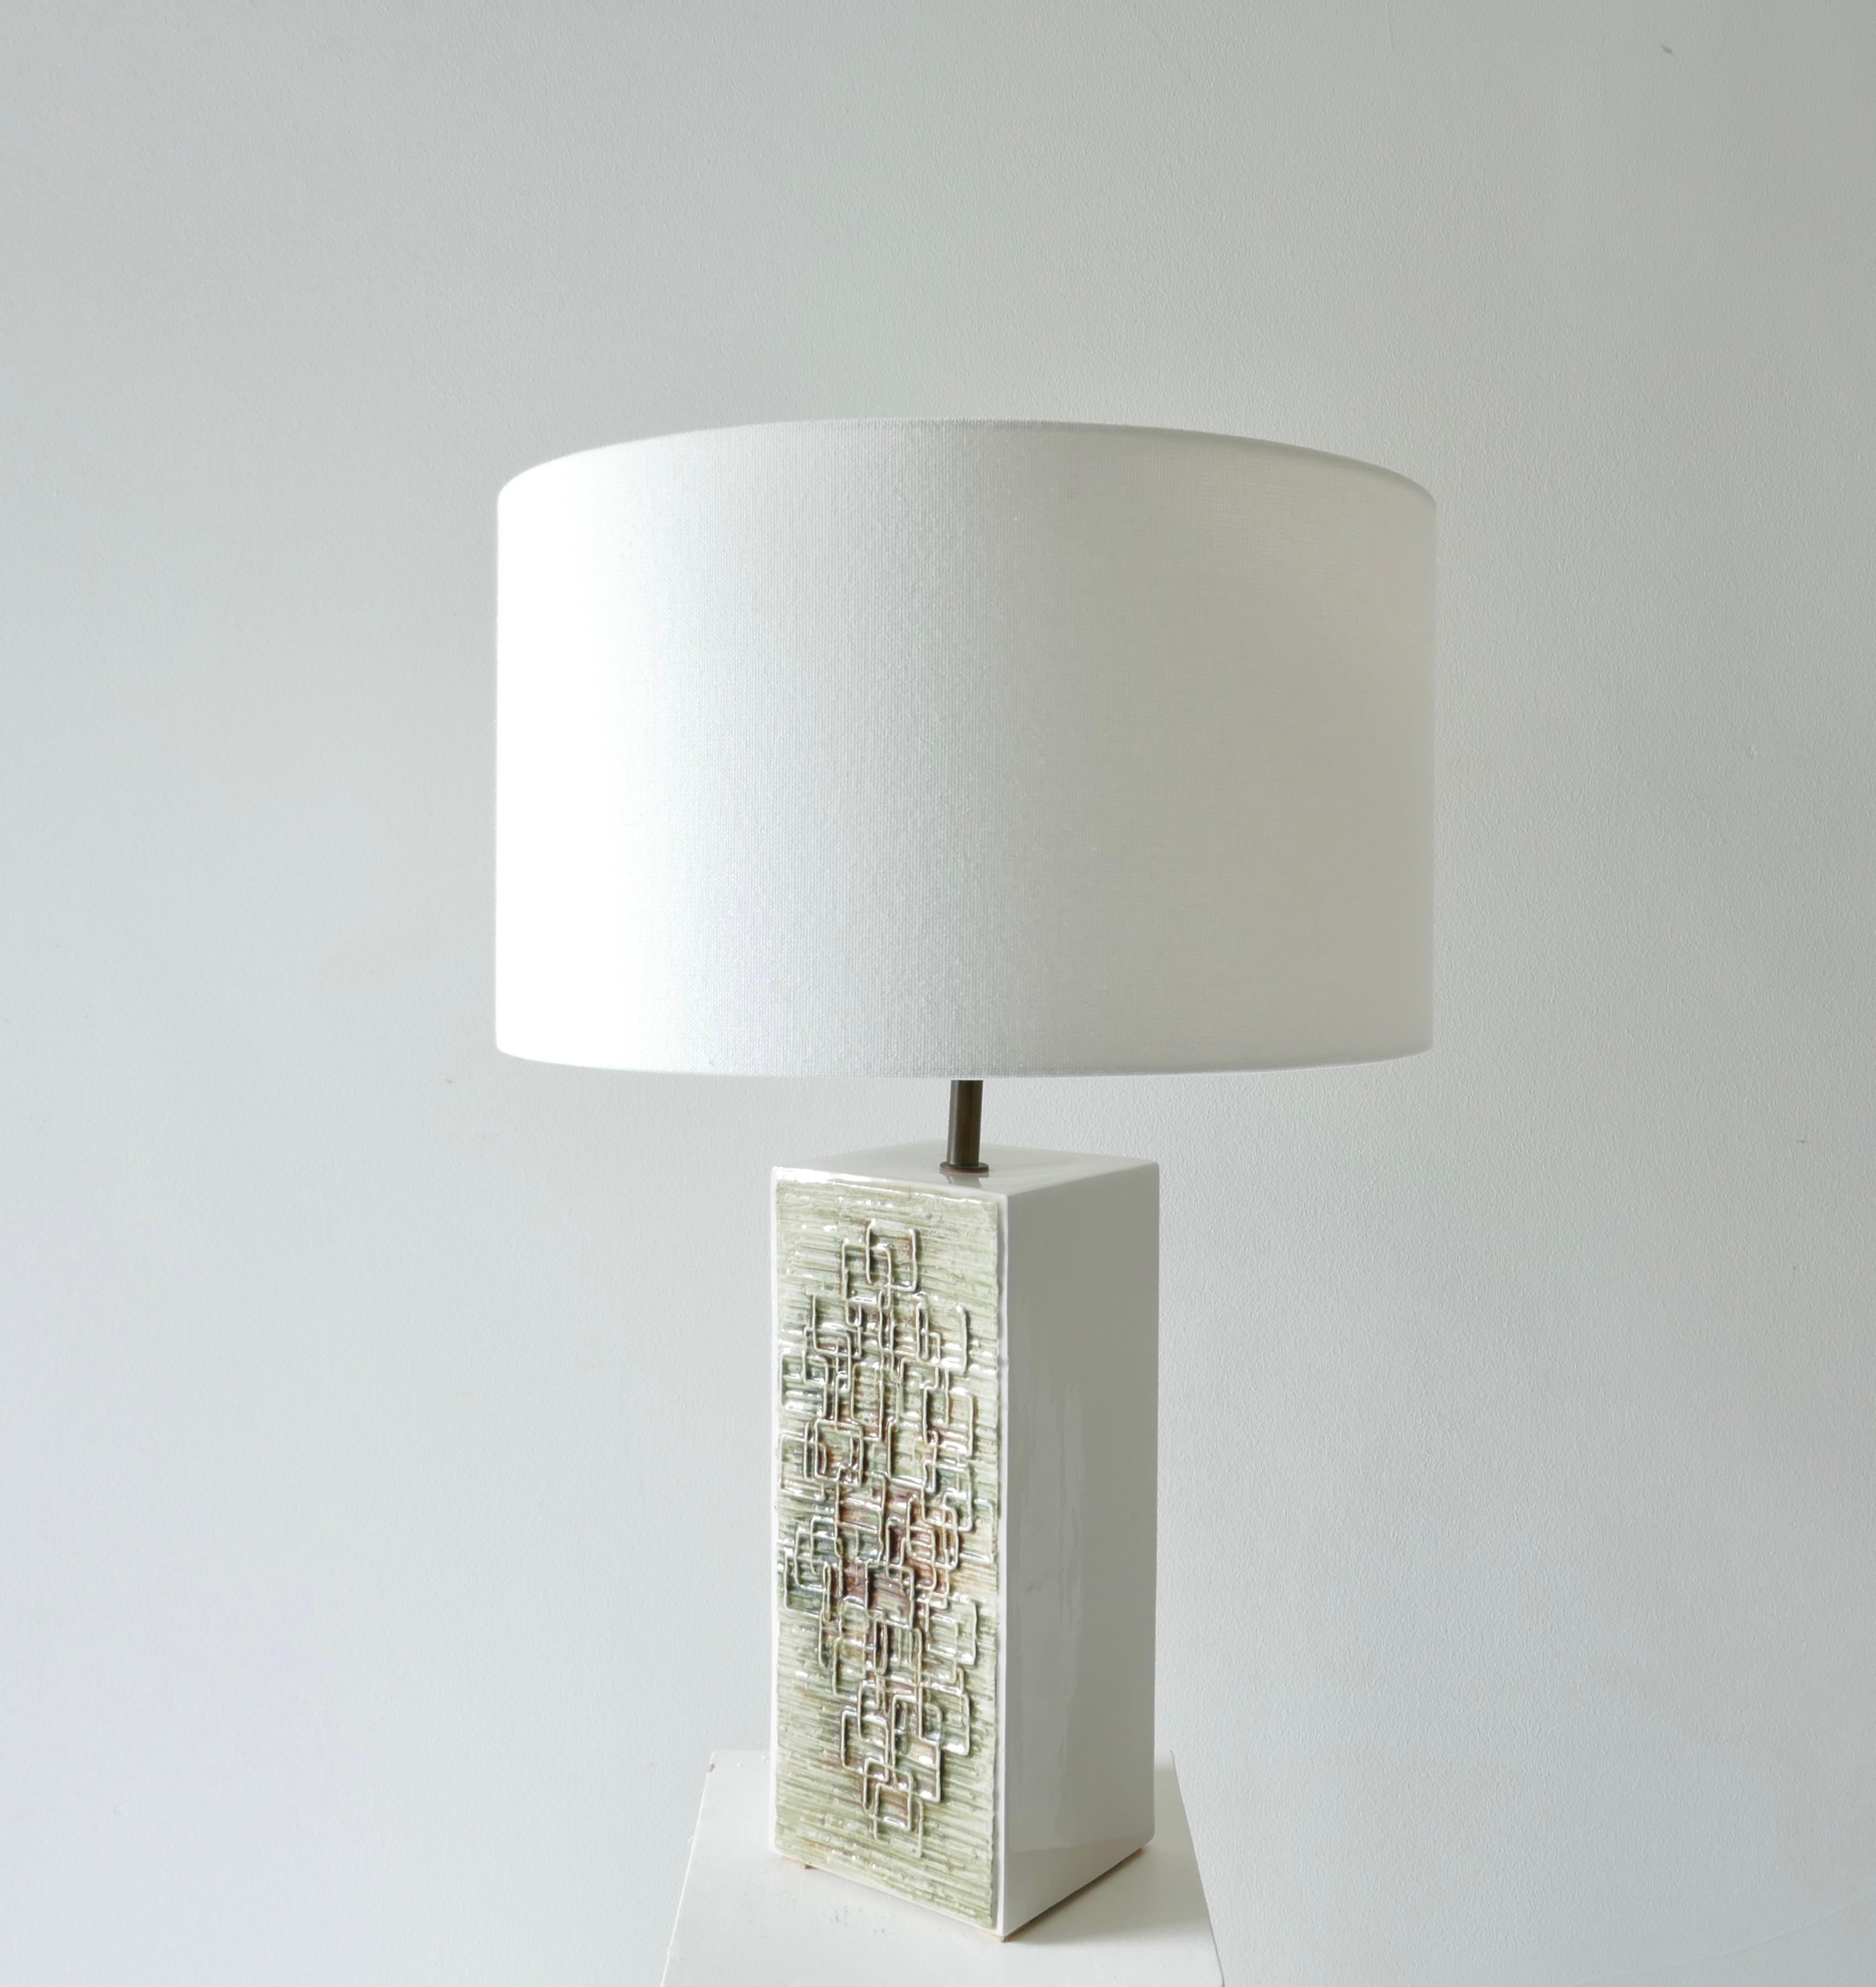 Mid-20th Century Green Tone Ceramic Table Lamp, 1960s For Sale